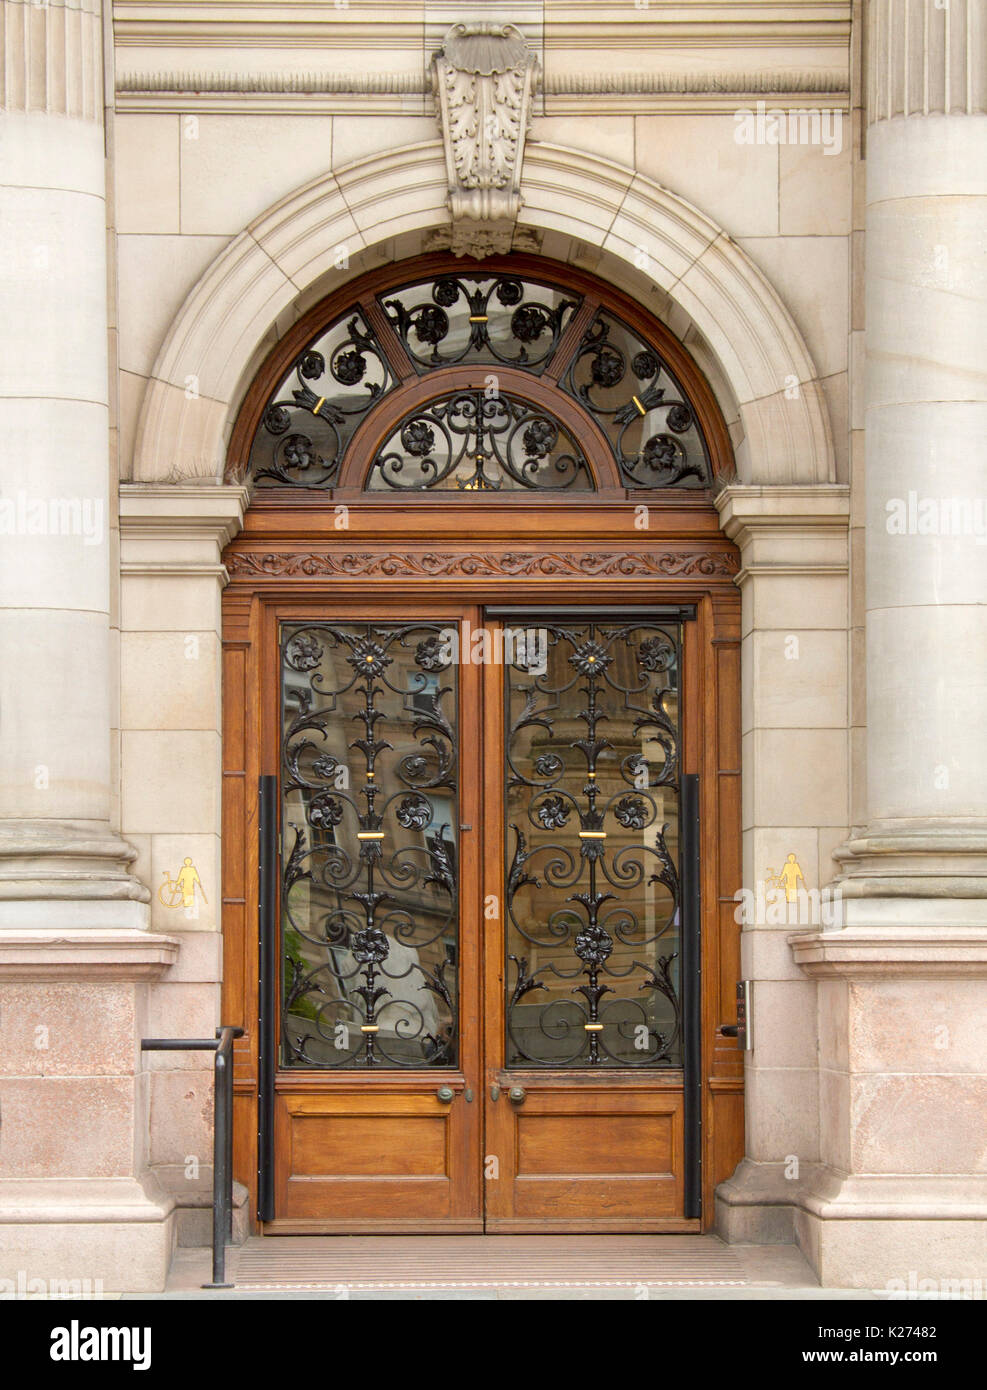 Stunning entrance / arched door of Glasgow City Chambers / town hall with decorative wrought iron design over glass panels, in Scotland Stock Photo